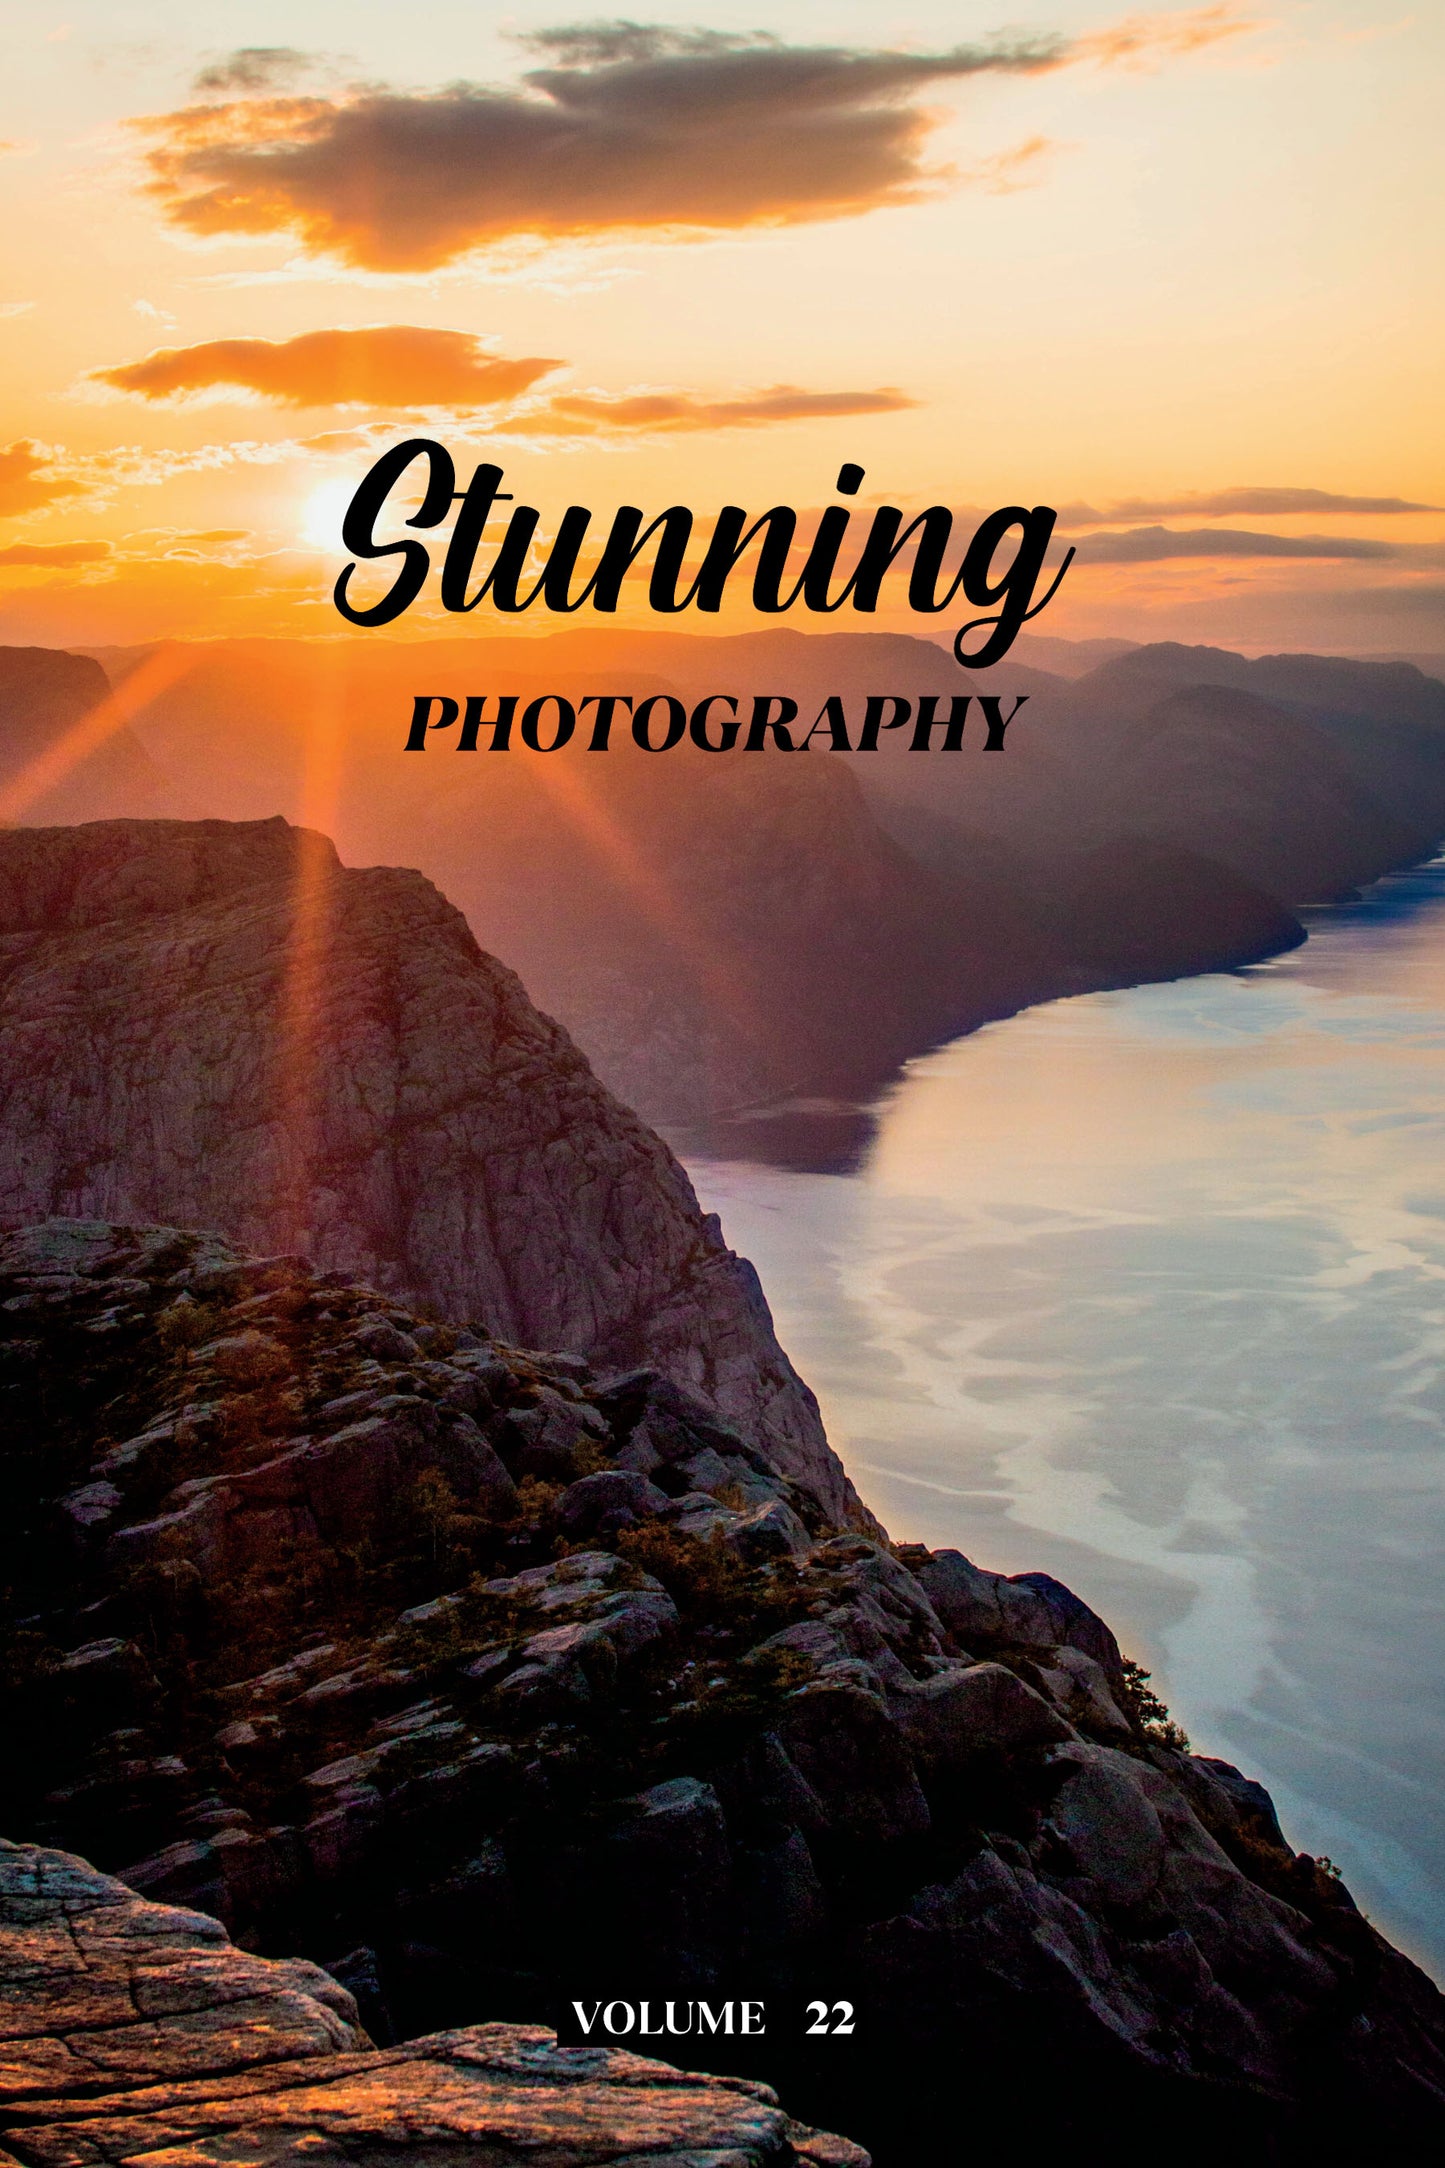 Stunning Photography Volume 22 (Physical Book Pre-Order)